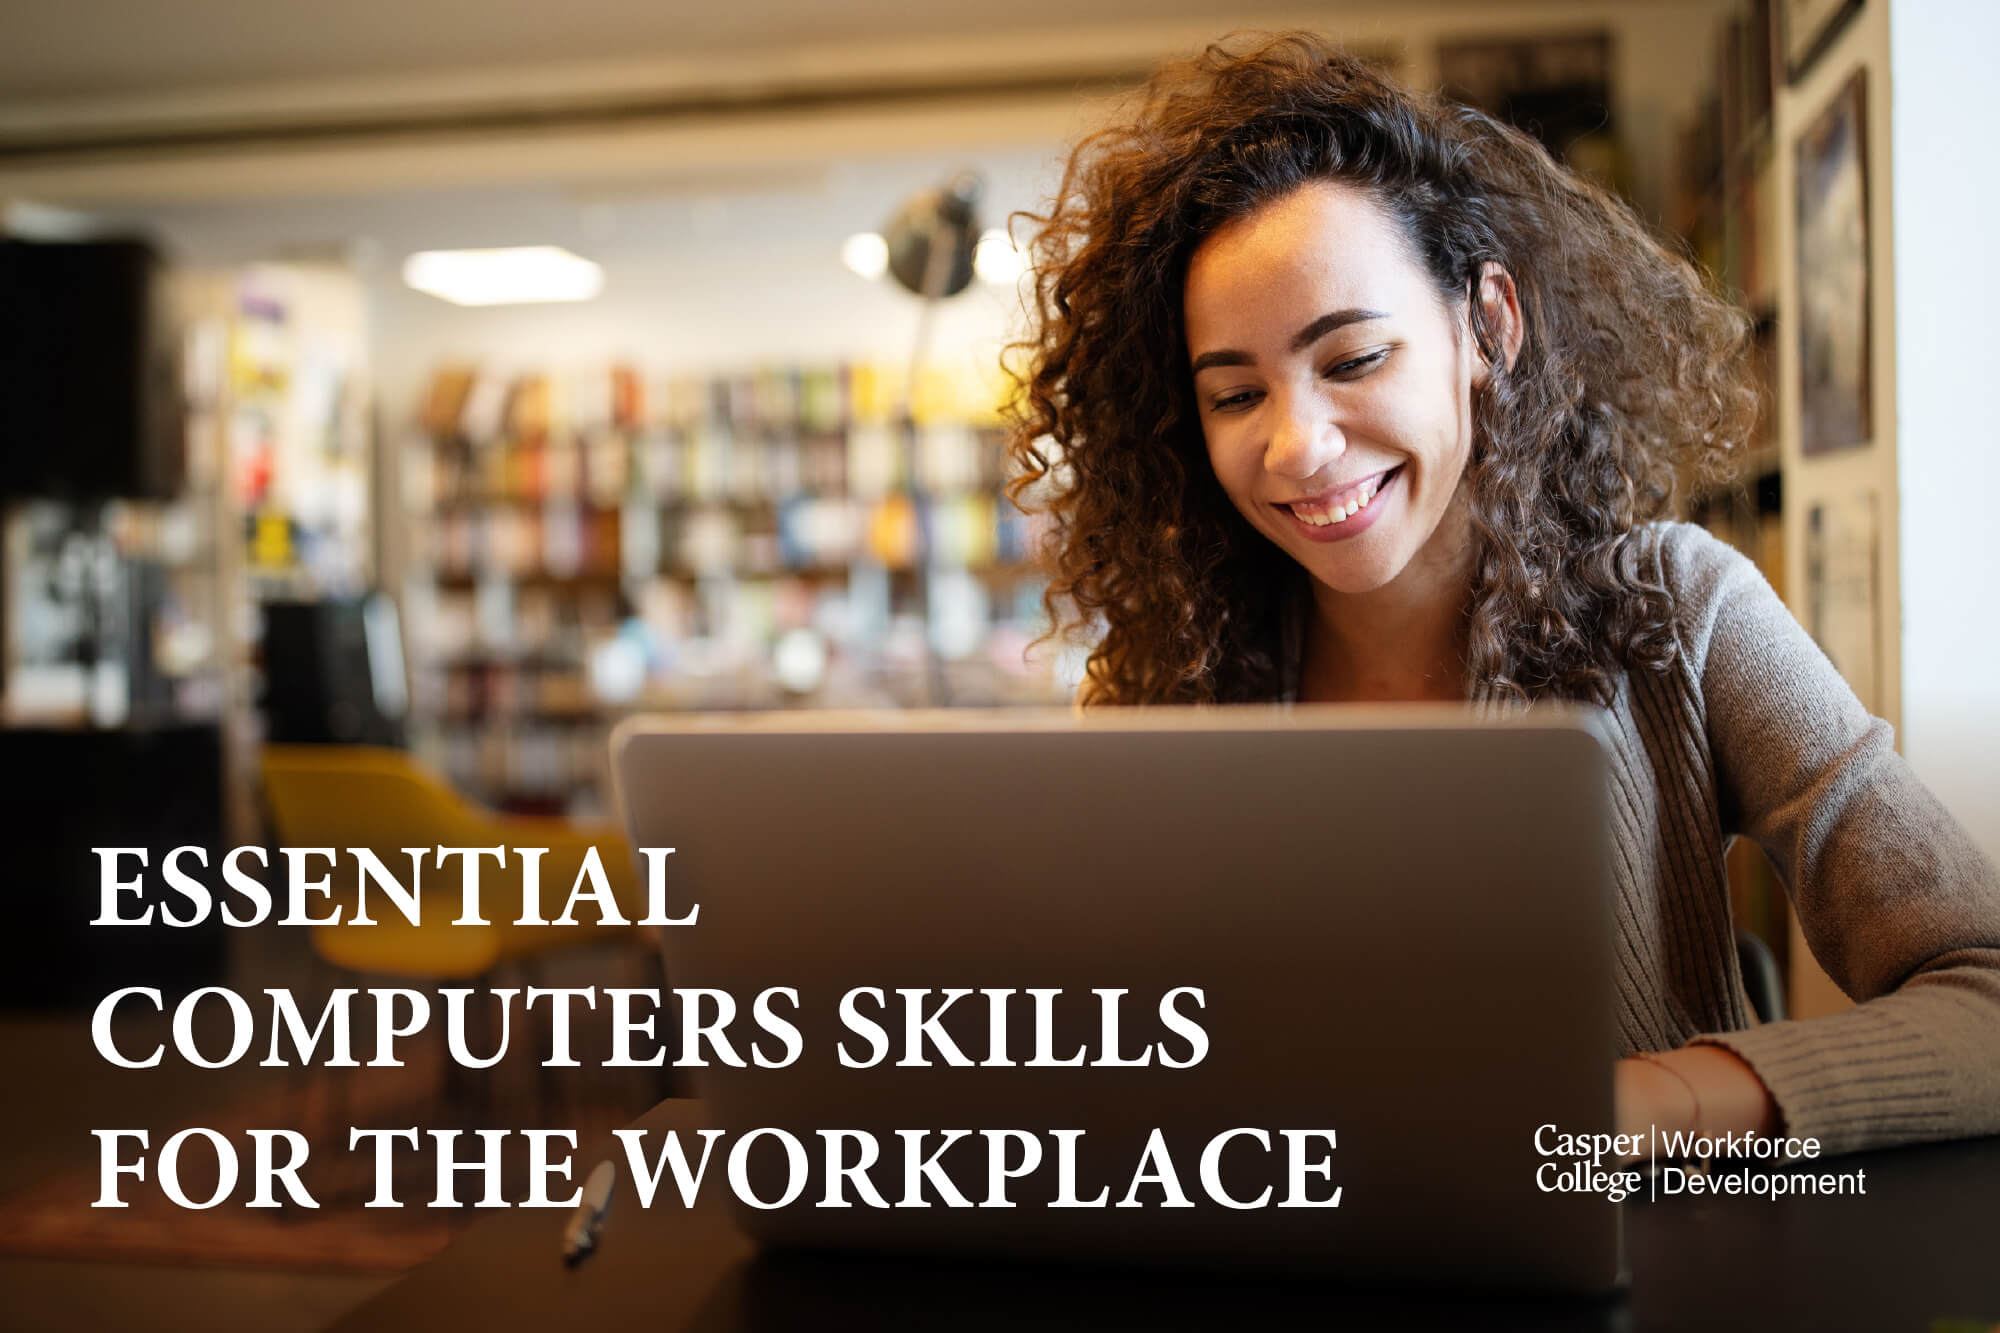 Image for workforce development image — essential computers skills for the workplace.